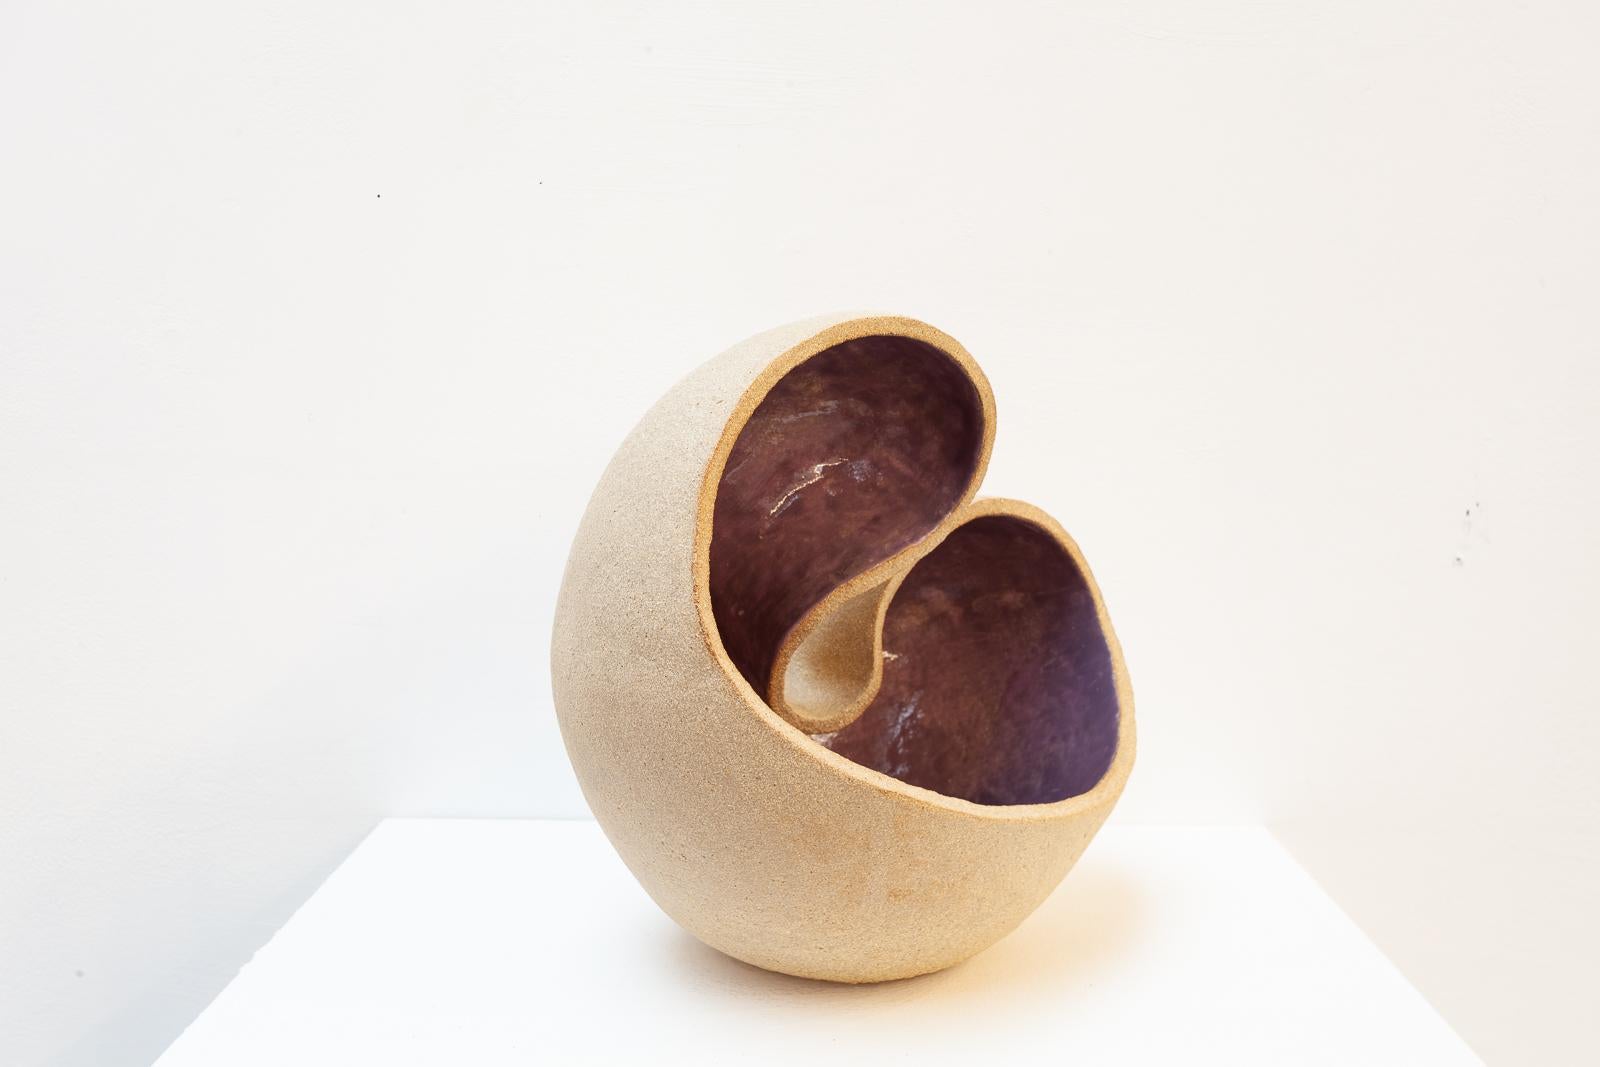 Hand-built, internal glazed stoneware ceramic. 

From her earliest experiments in art Alison has found the variety and beauty of the human form endlessly fascinating and life-drawing was her first love. For her the human element is vital. 

It was